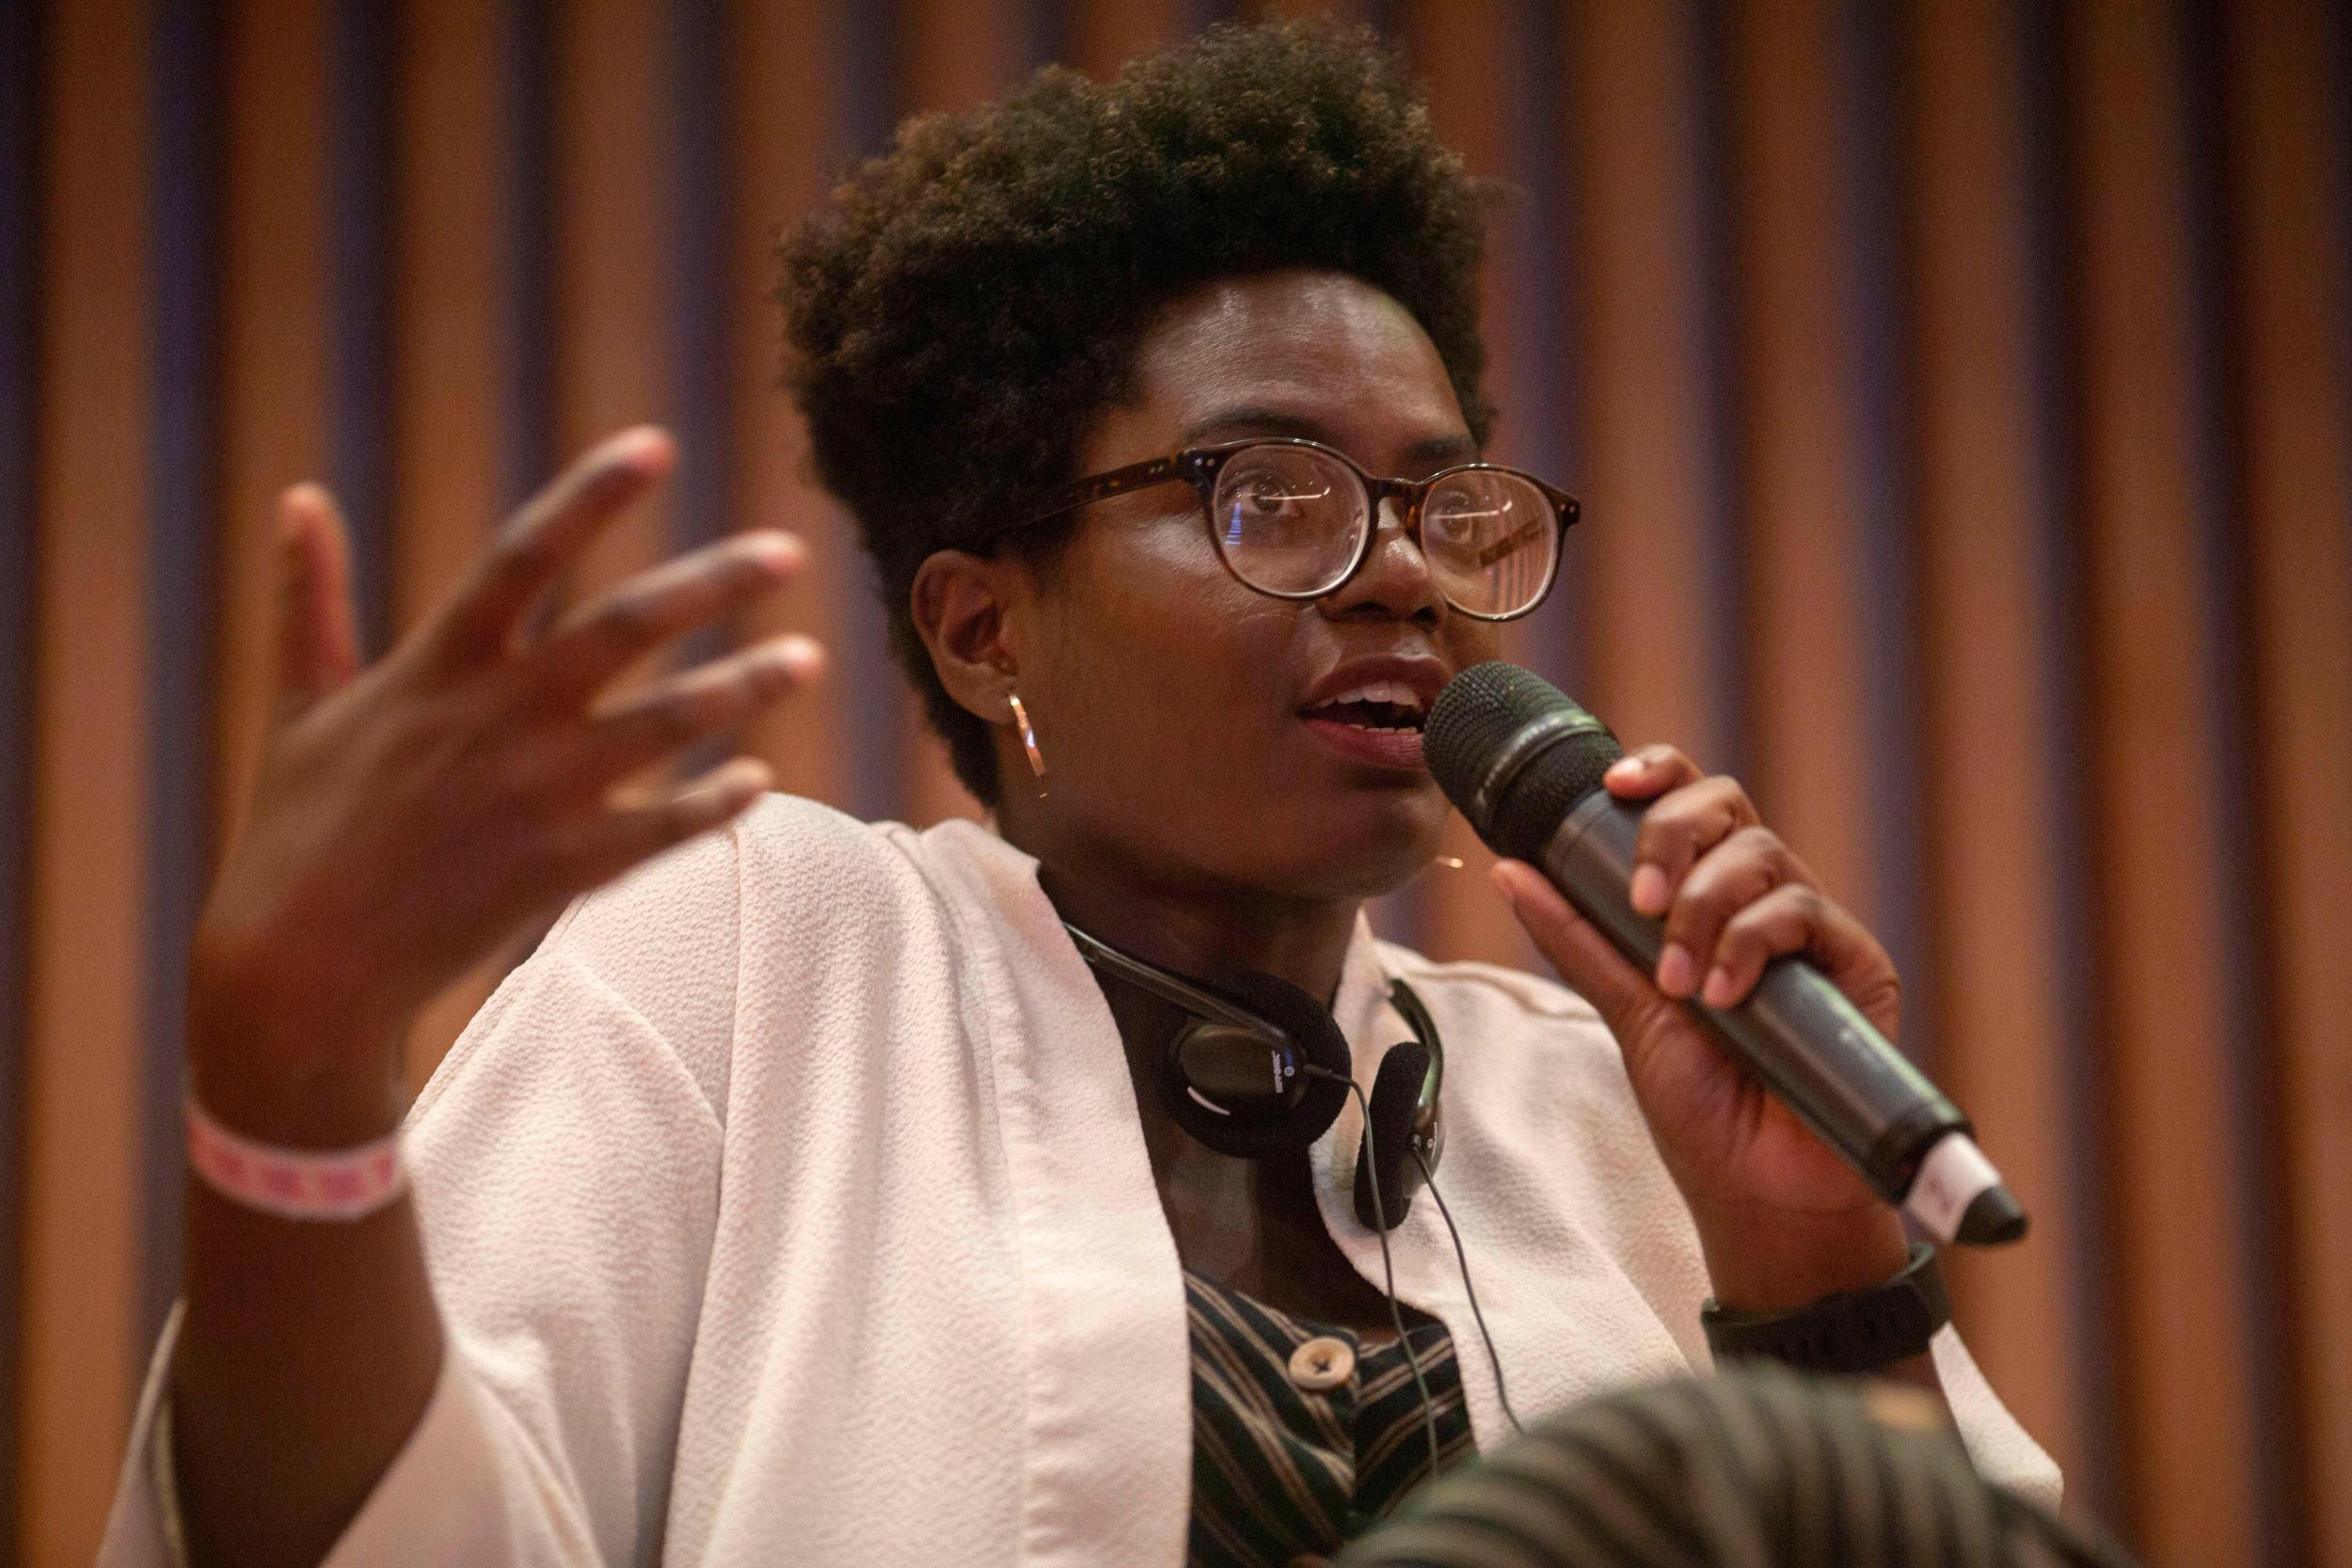 Reni Eddo-Lodge speaks during a panel at the WOW Festival 2018